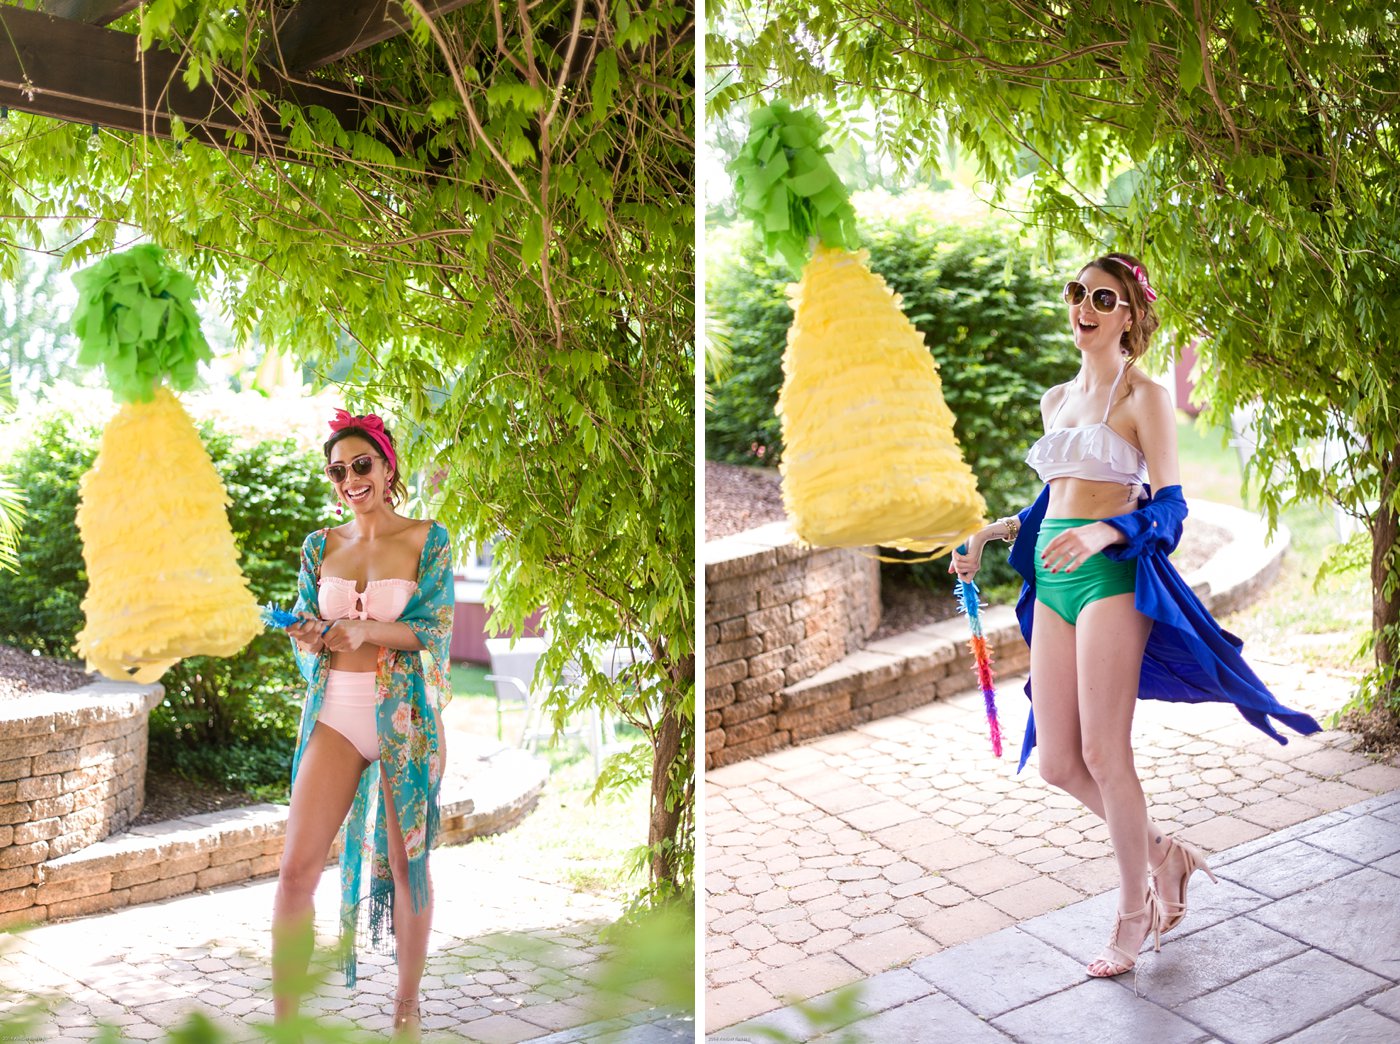 Girls in vintage inspired bathing suits swinging at pineapple pinata